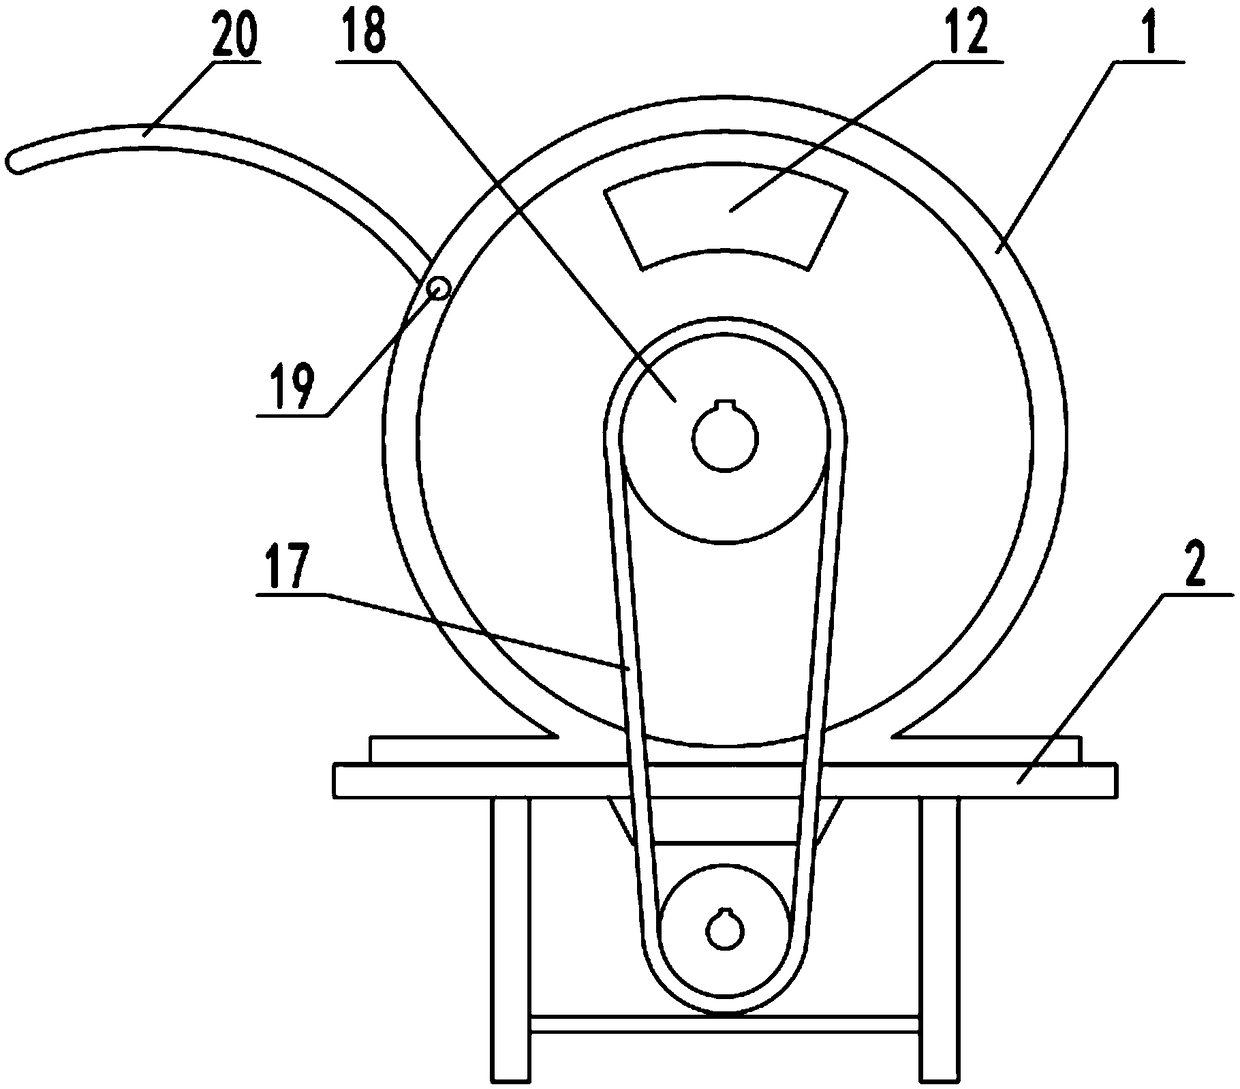 Corn threshing device for agricultural processing